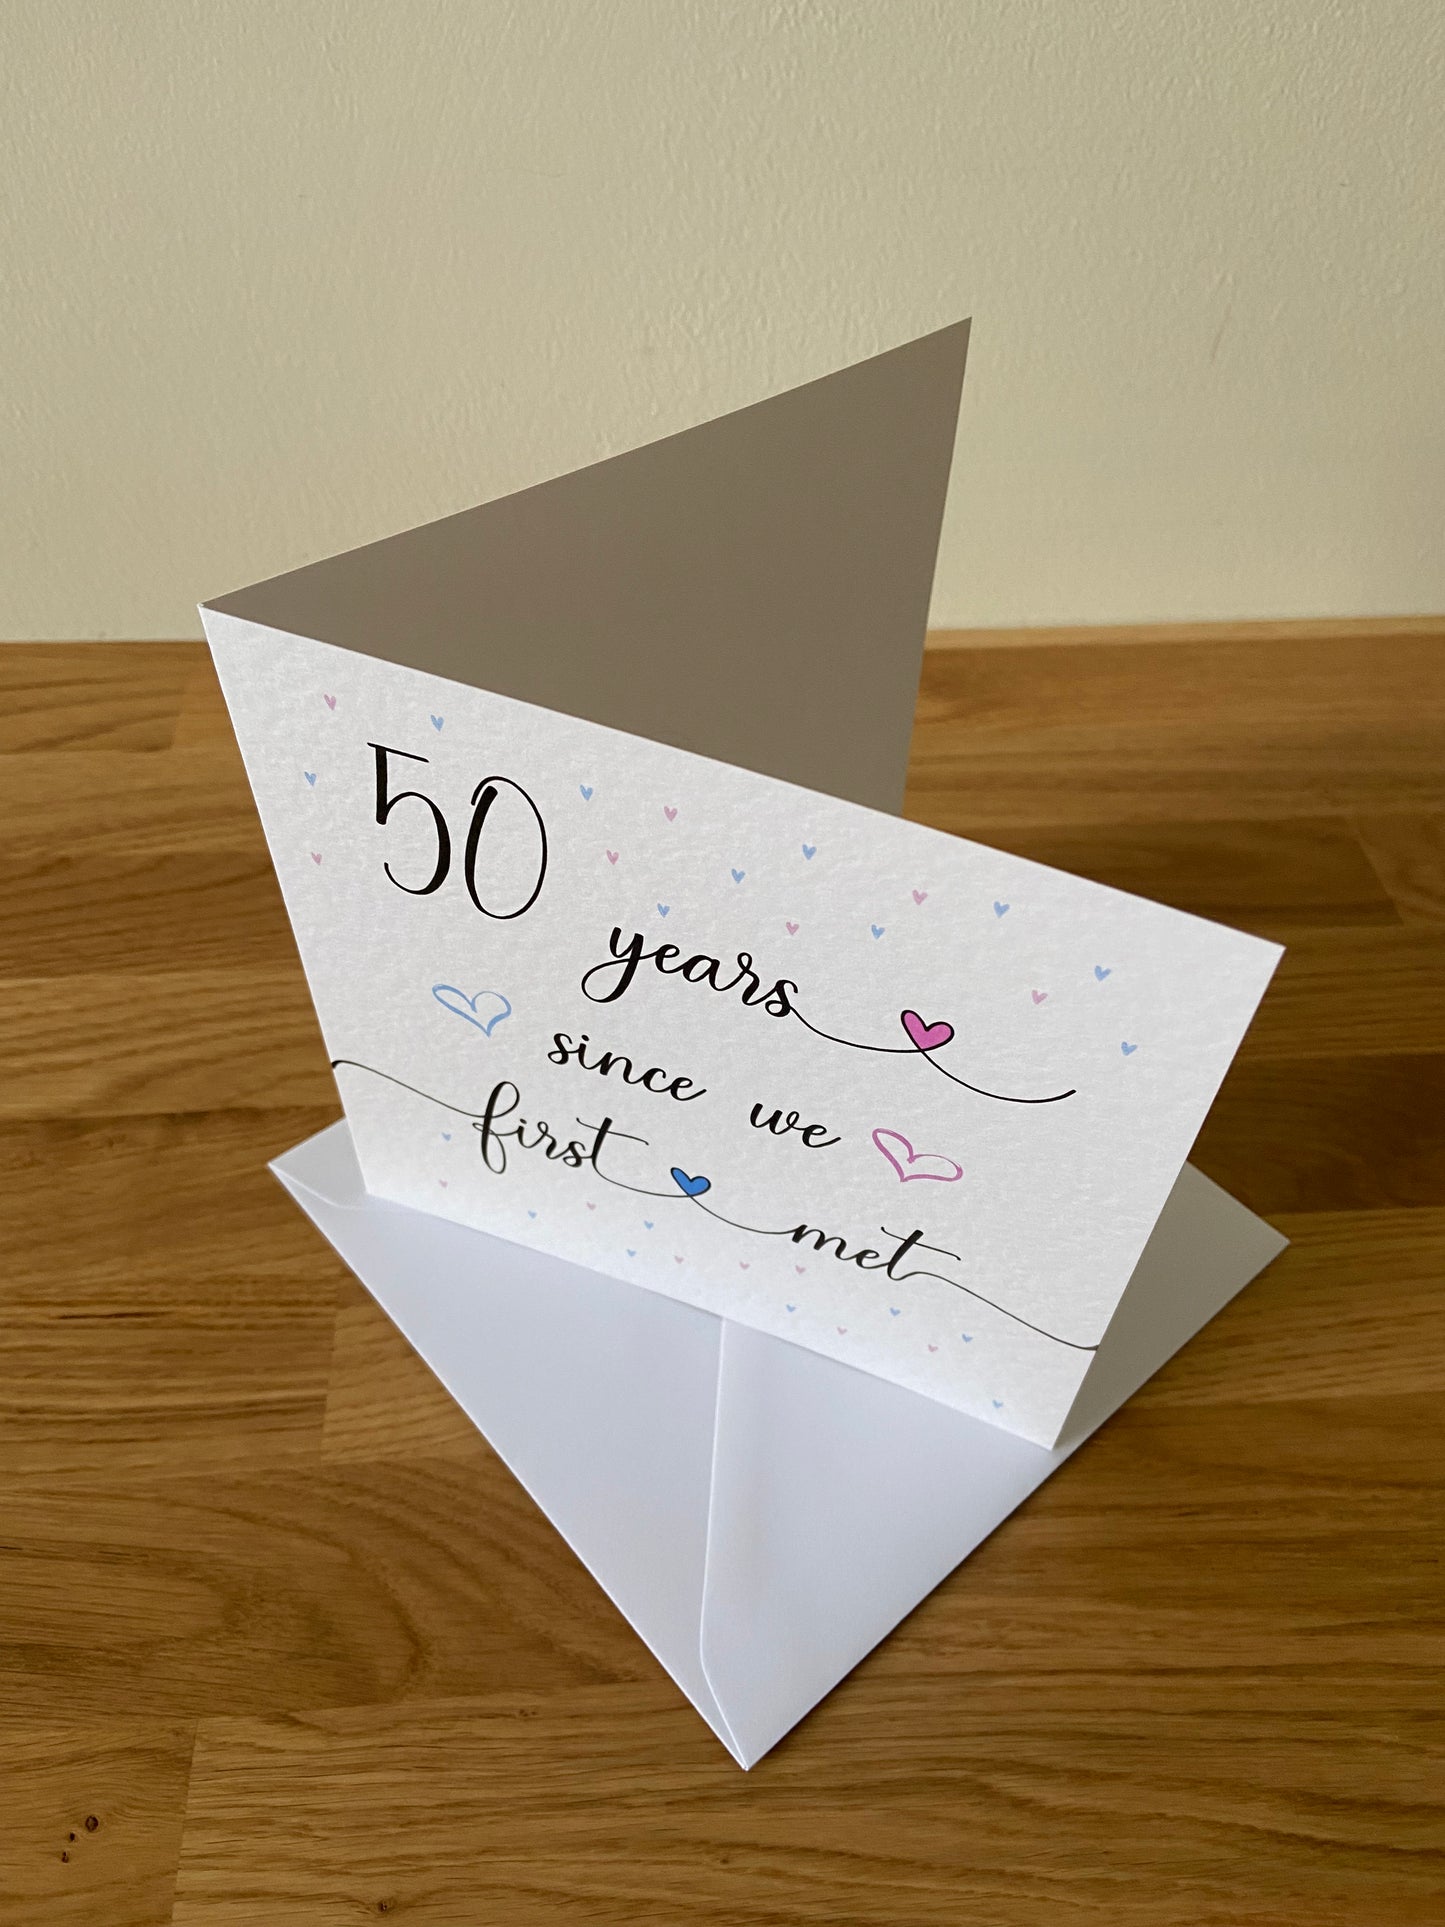 Since we met anniversary card - any year number